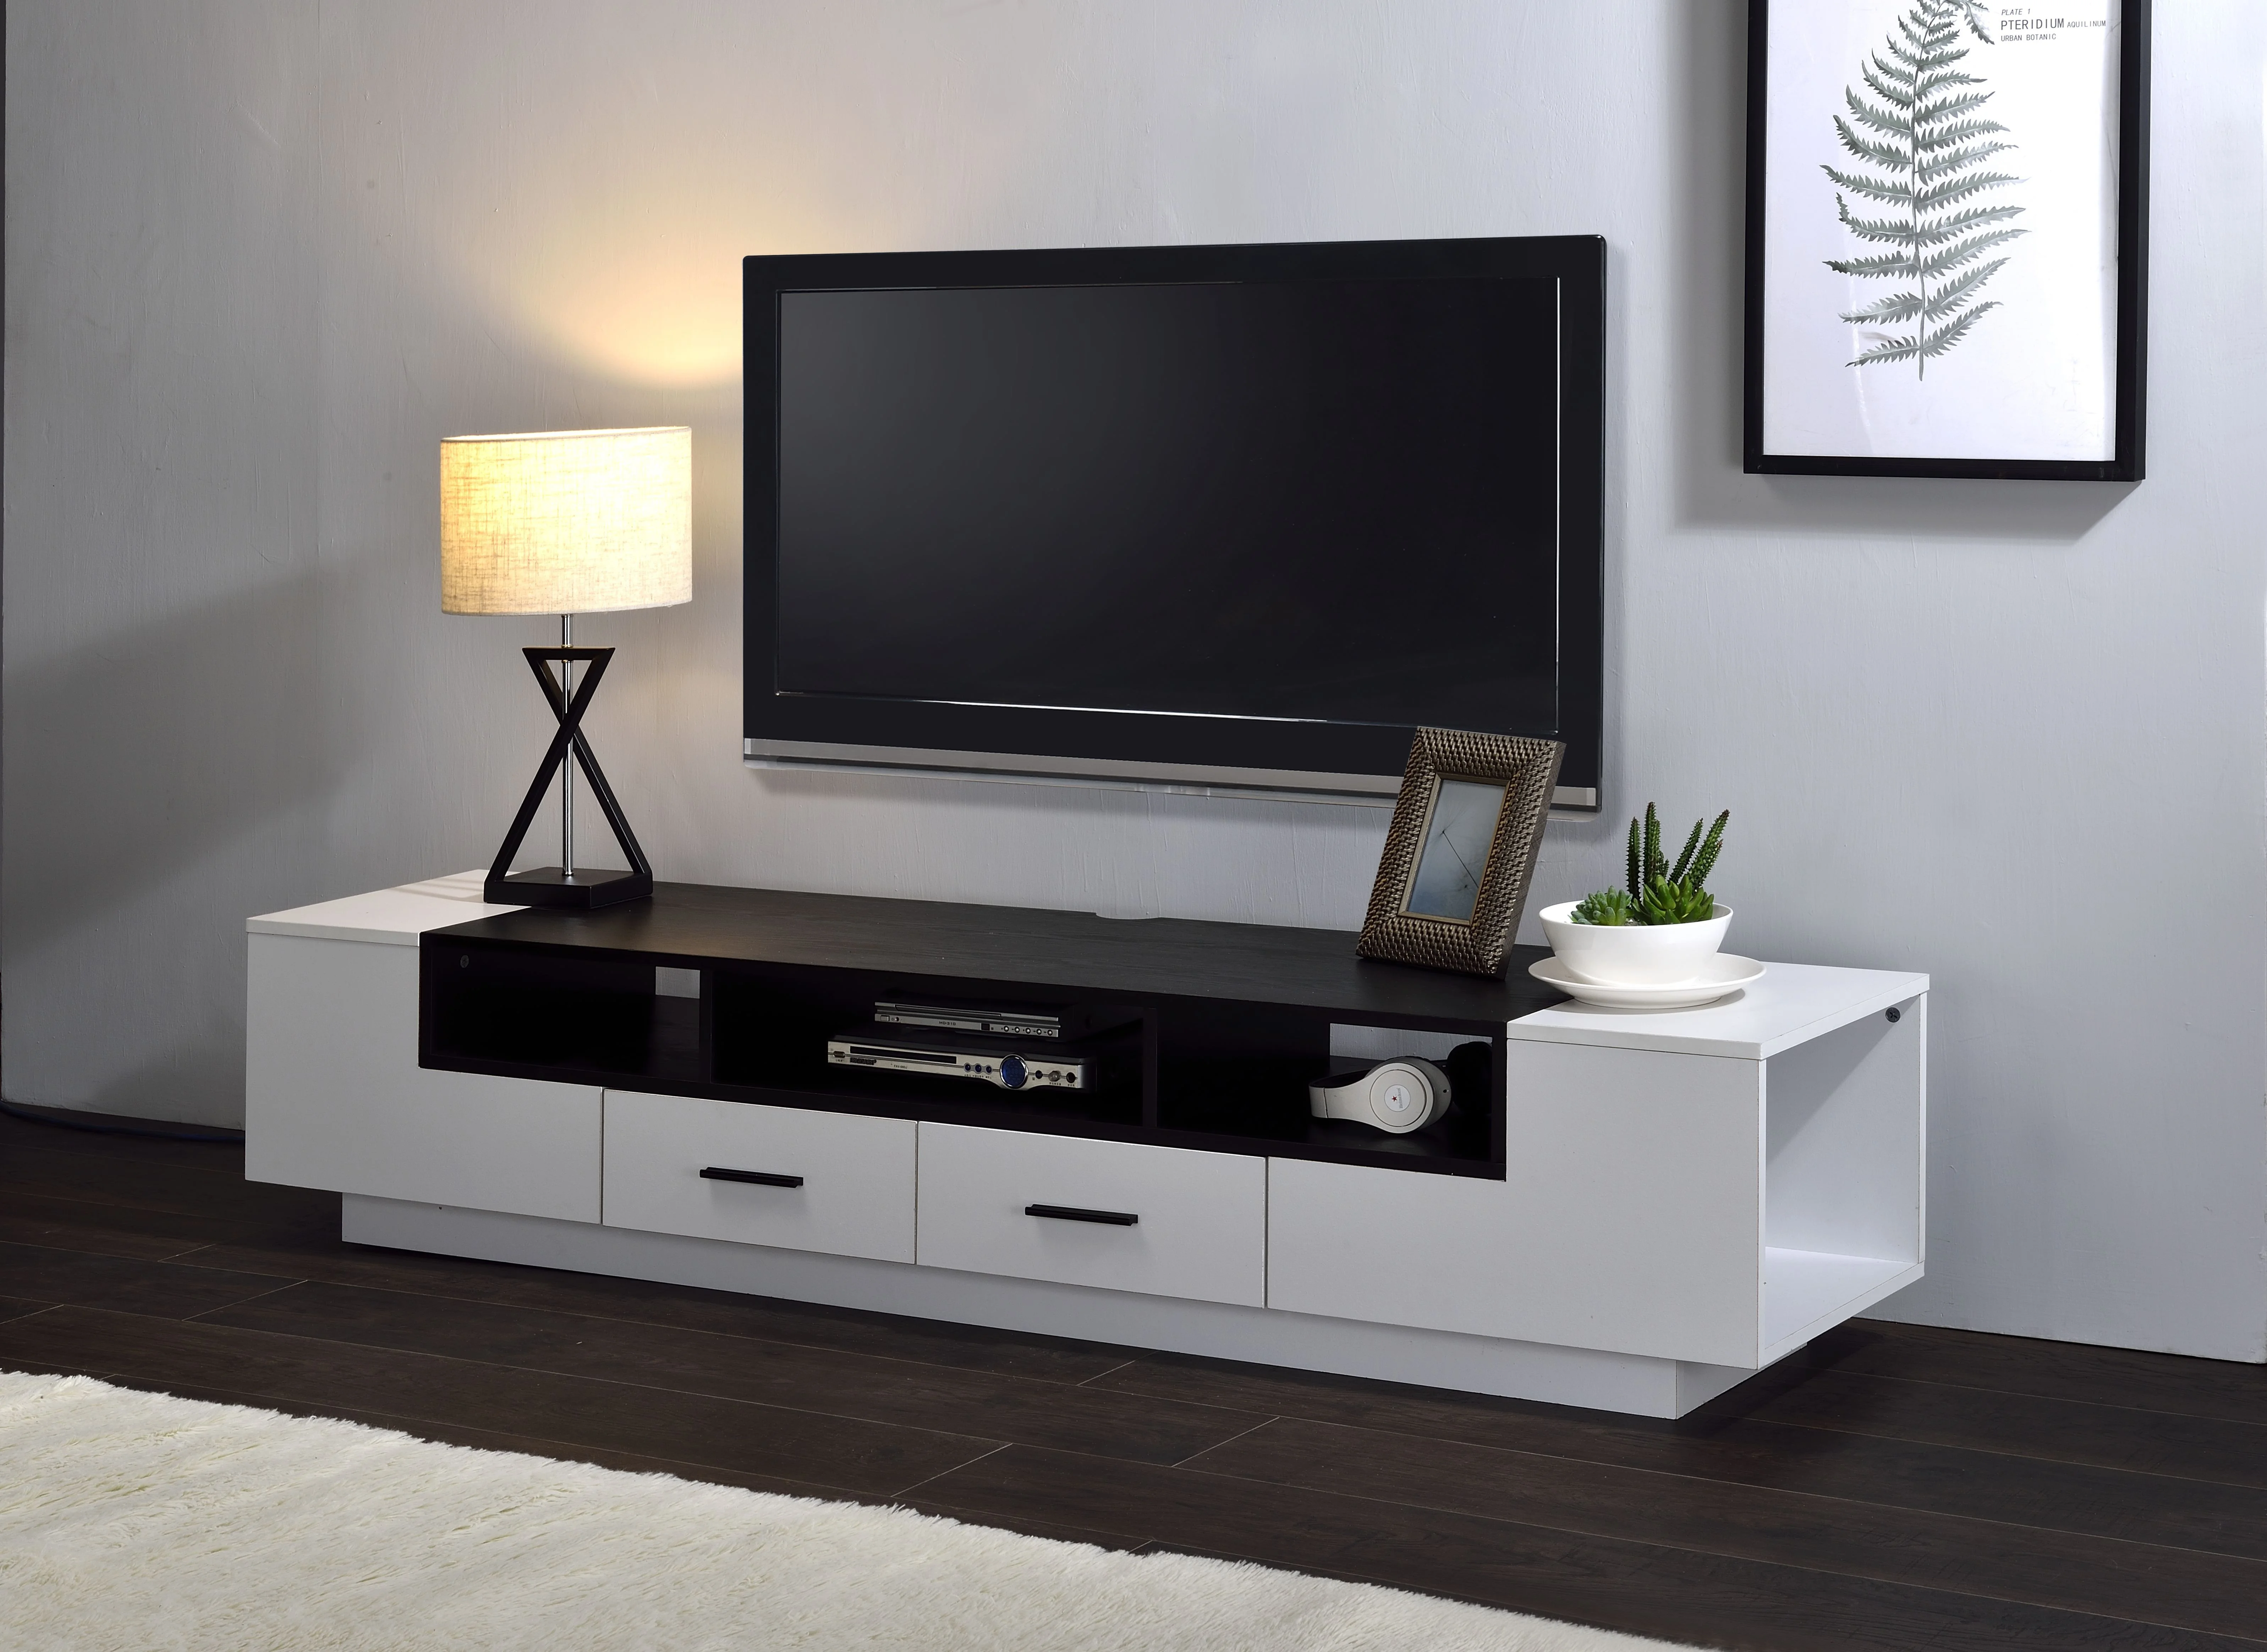 

Scandinavian Style TV Stand clean-lined design TV Furniture TV Cabinet Table Living Room Furniture White Black 70" x 16" x 19"H